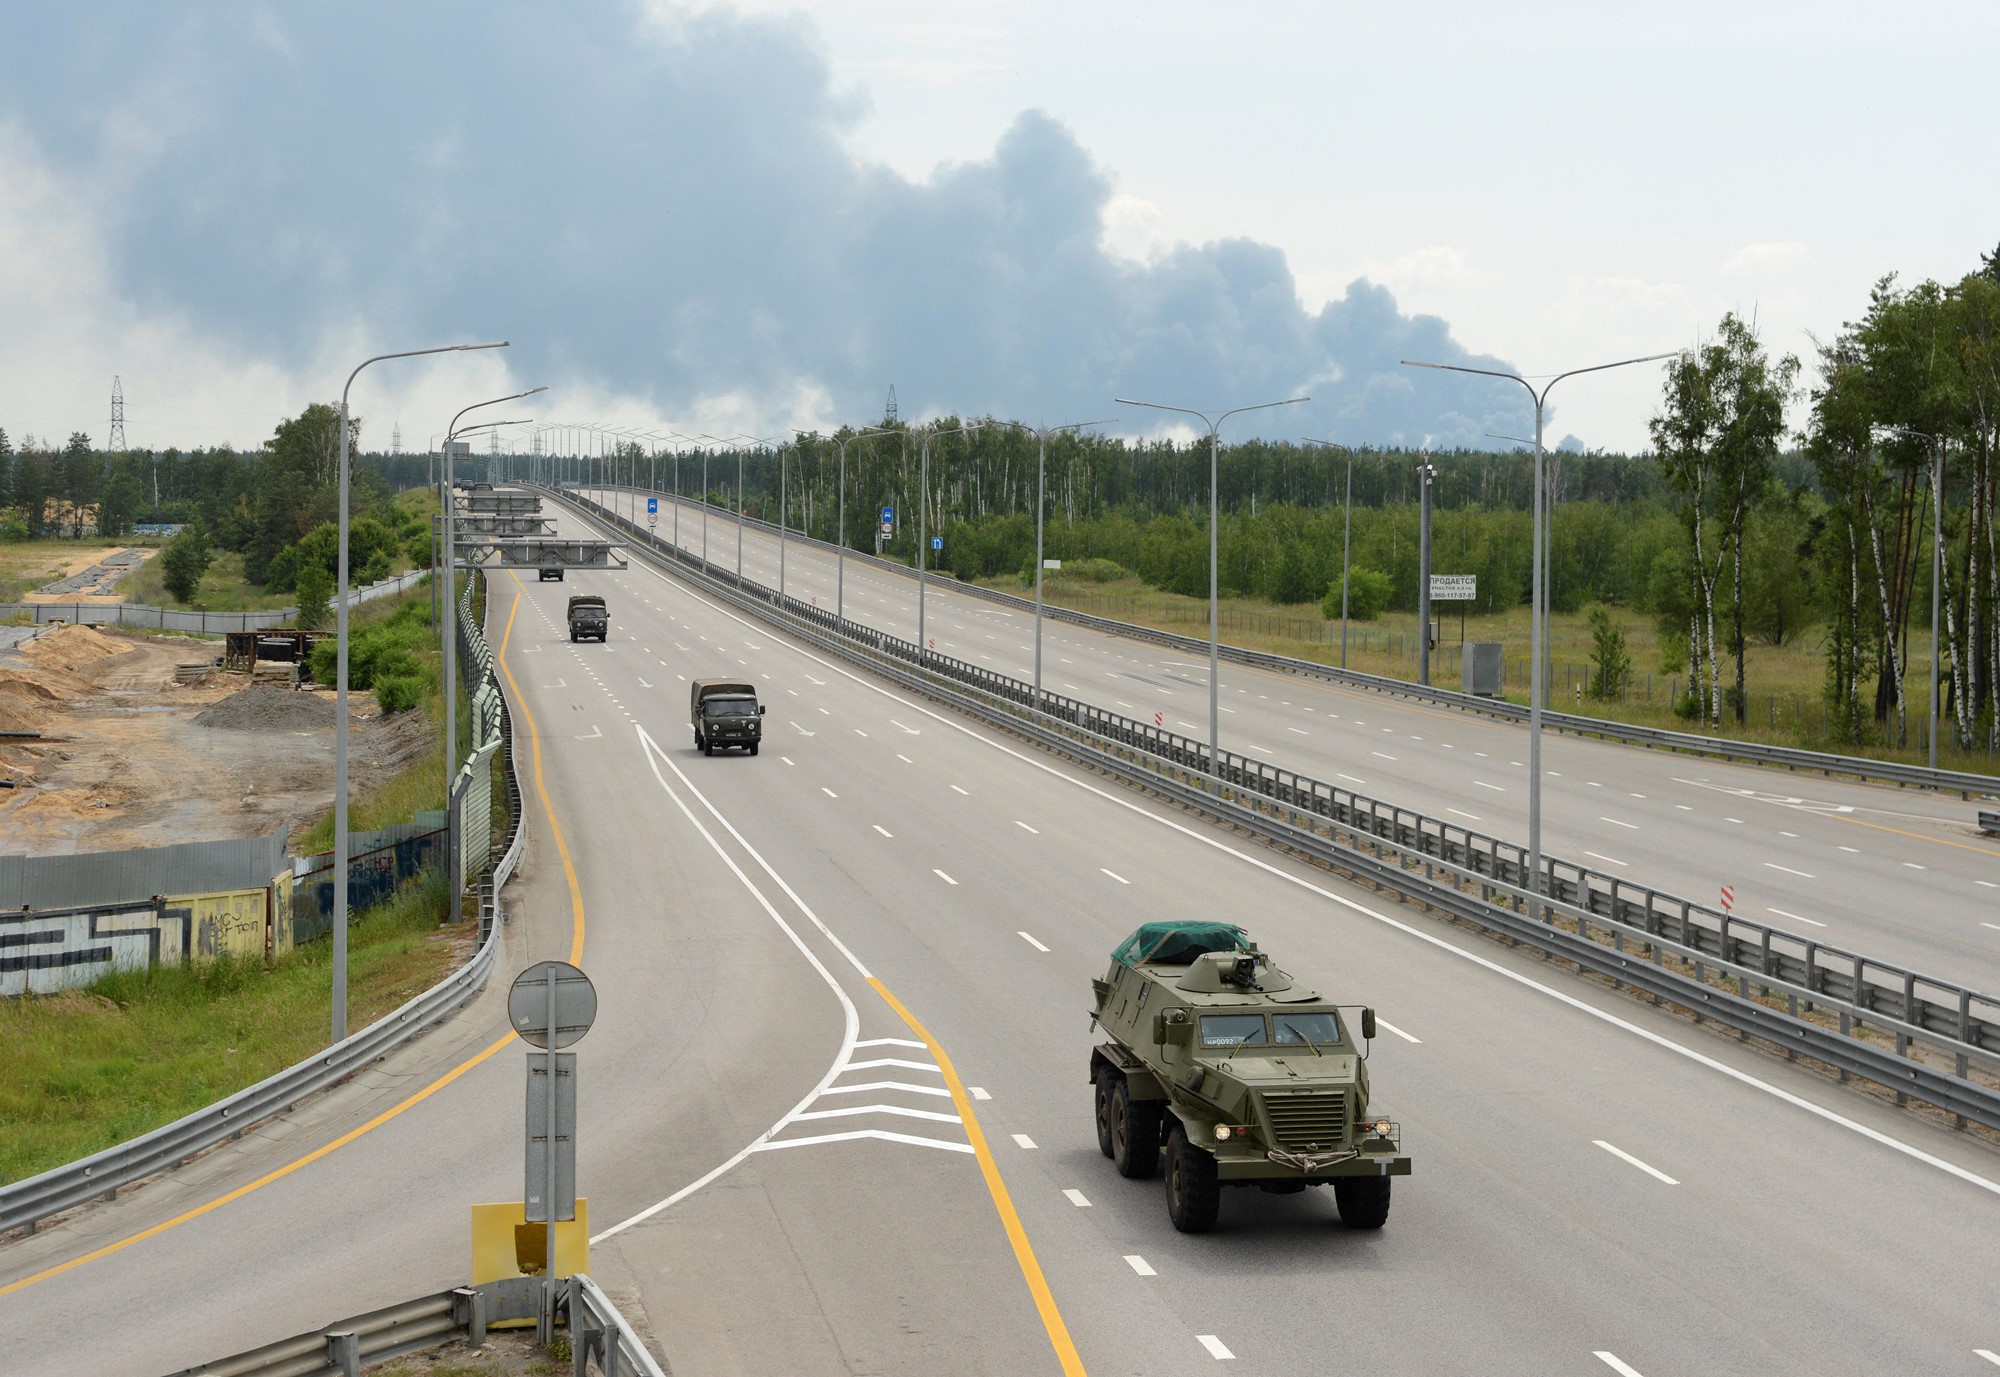 Four military vehicles drive along an empty highway